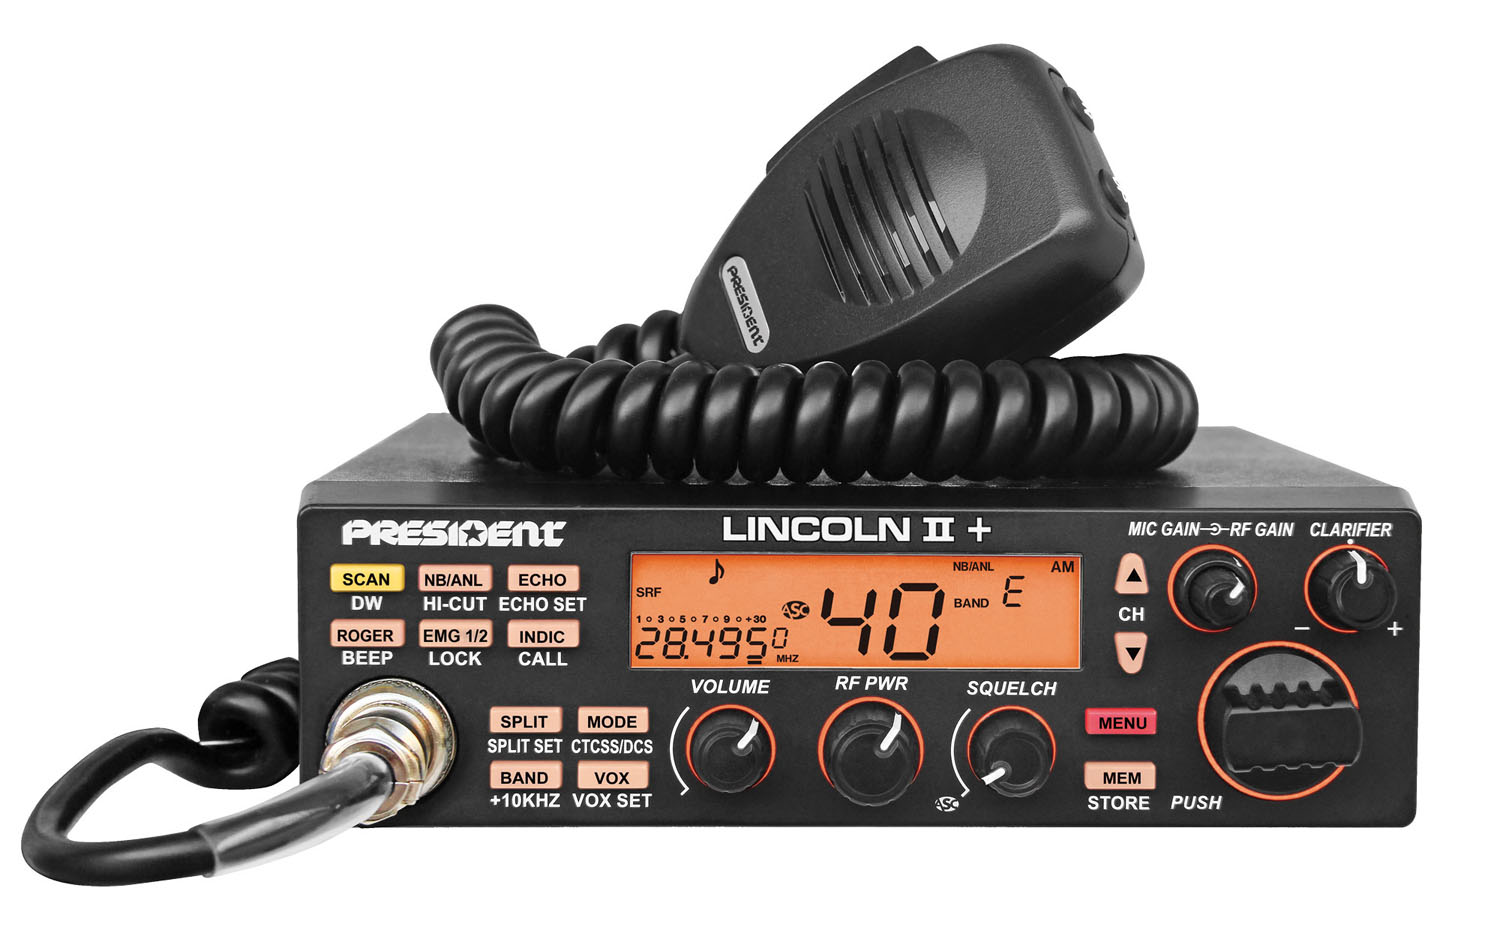 LINCOLNII+ AM/FM/LSB/USB/CW 10/12 METER 50 WATT TRANSCEIVER WITH 3 FACE COLOR OPTIONS, DUAL WATCH, ECHO & ROGER BEEP